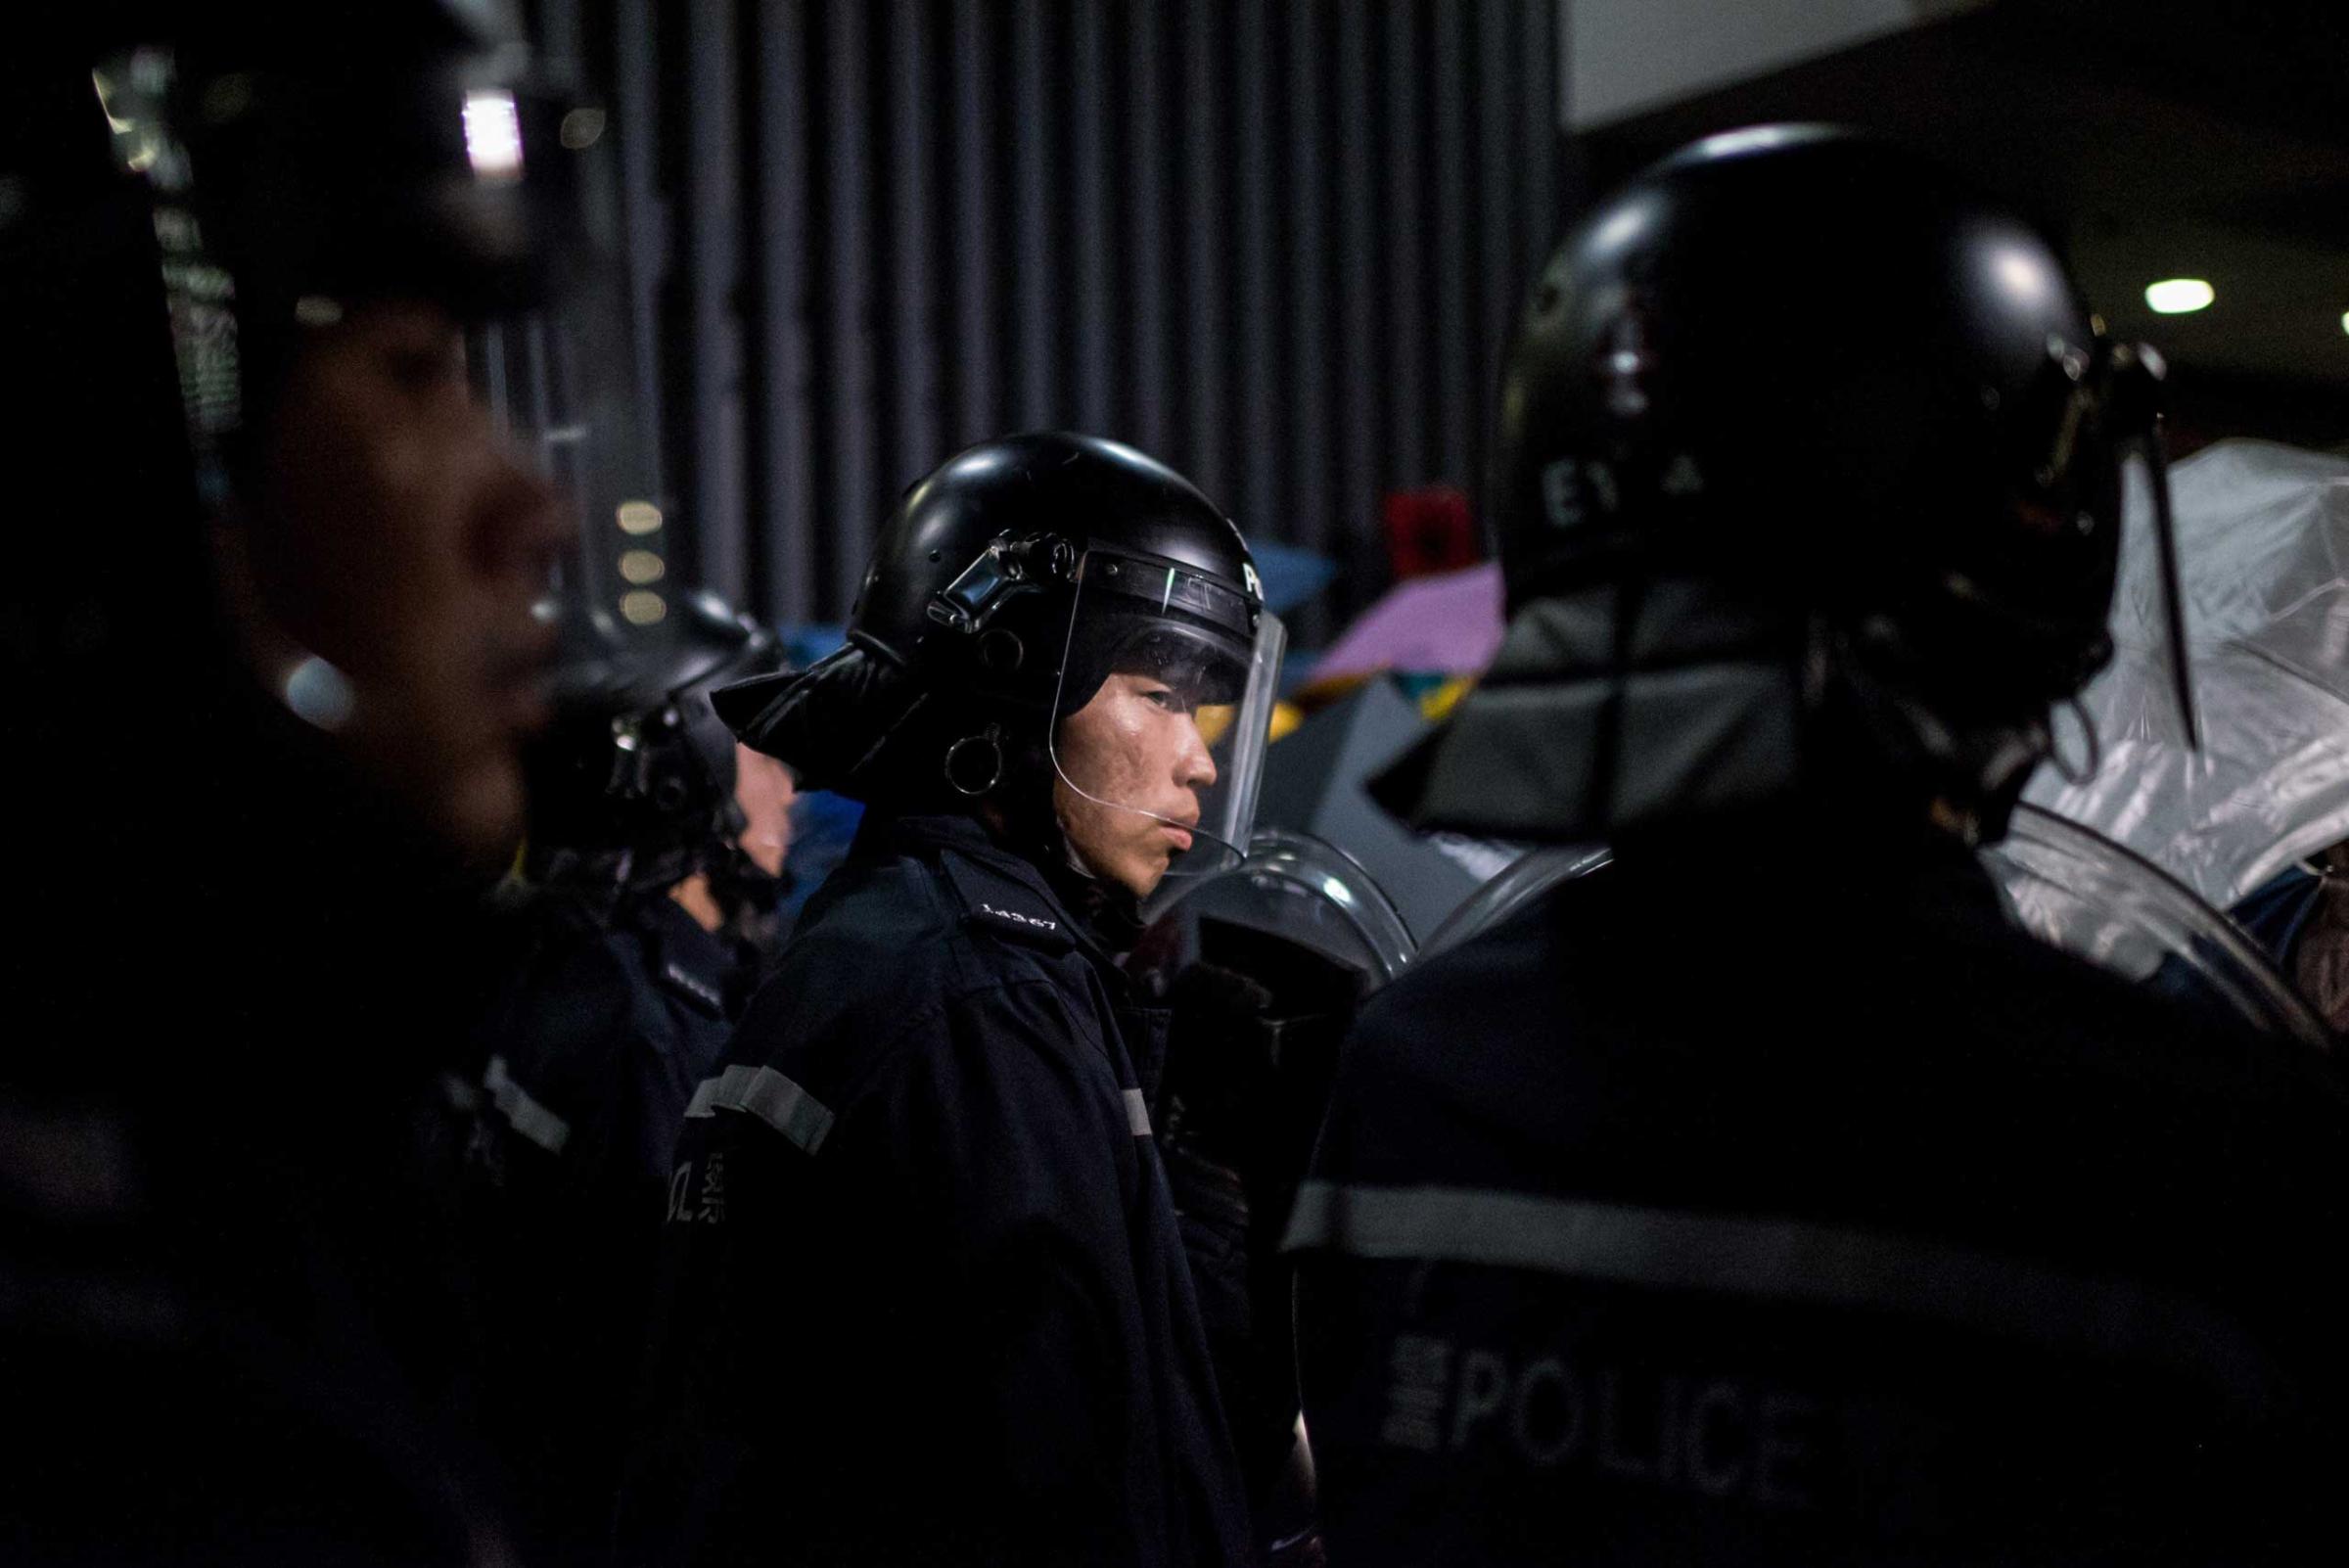 Police face pro-democracy protesters on Nov. 19, 2014 outside the central government offices in the Admiralty district of Hong Kong.